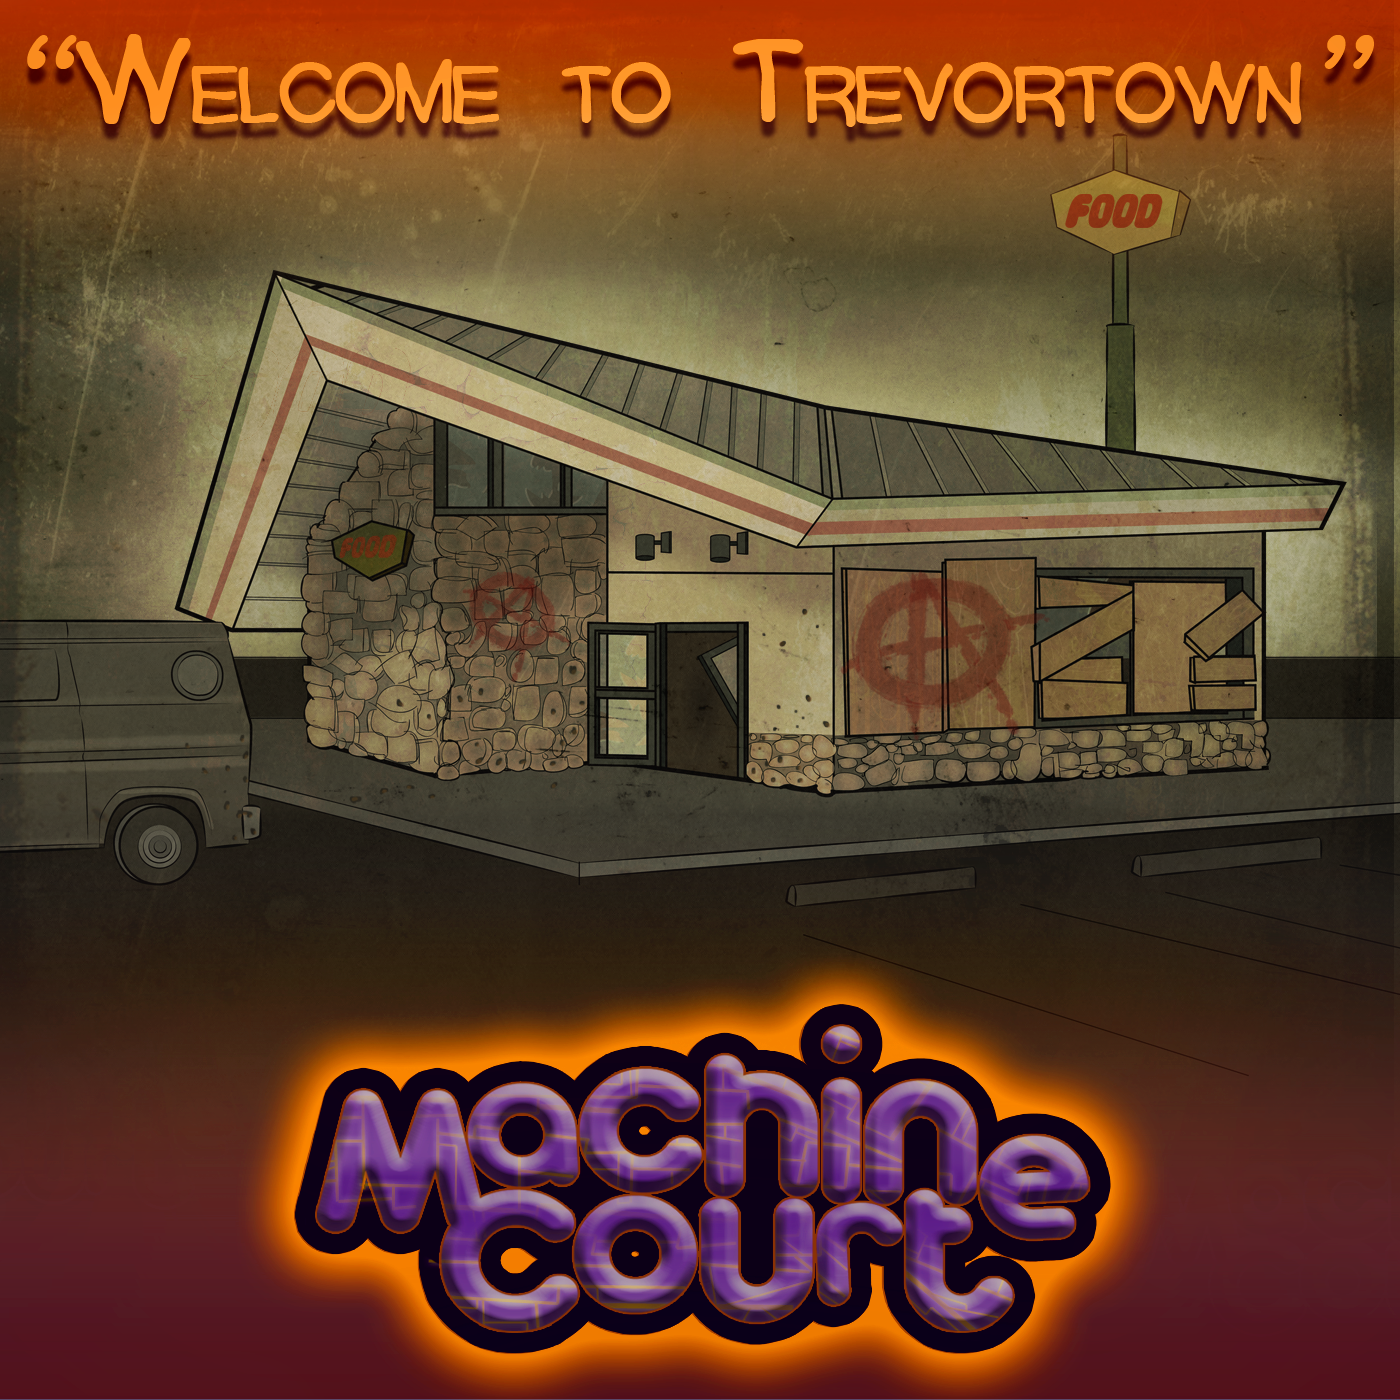 4.05 “Welcome to Trevortown”